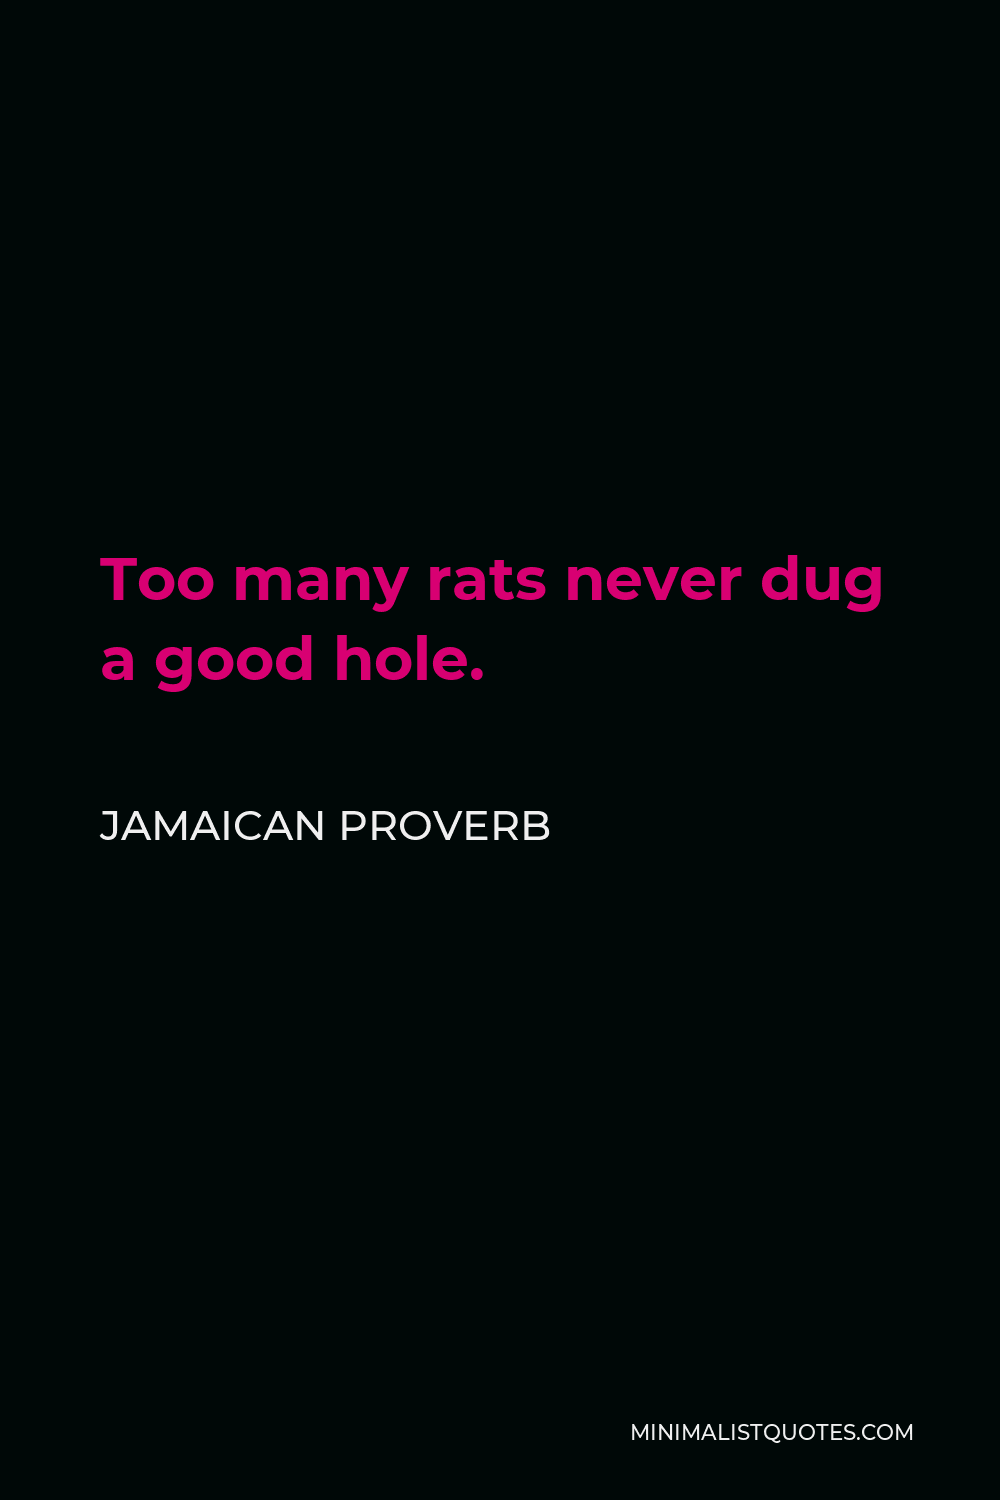 Jamaican Proverb Quote - Too many rats never dug a good hole.